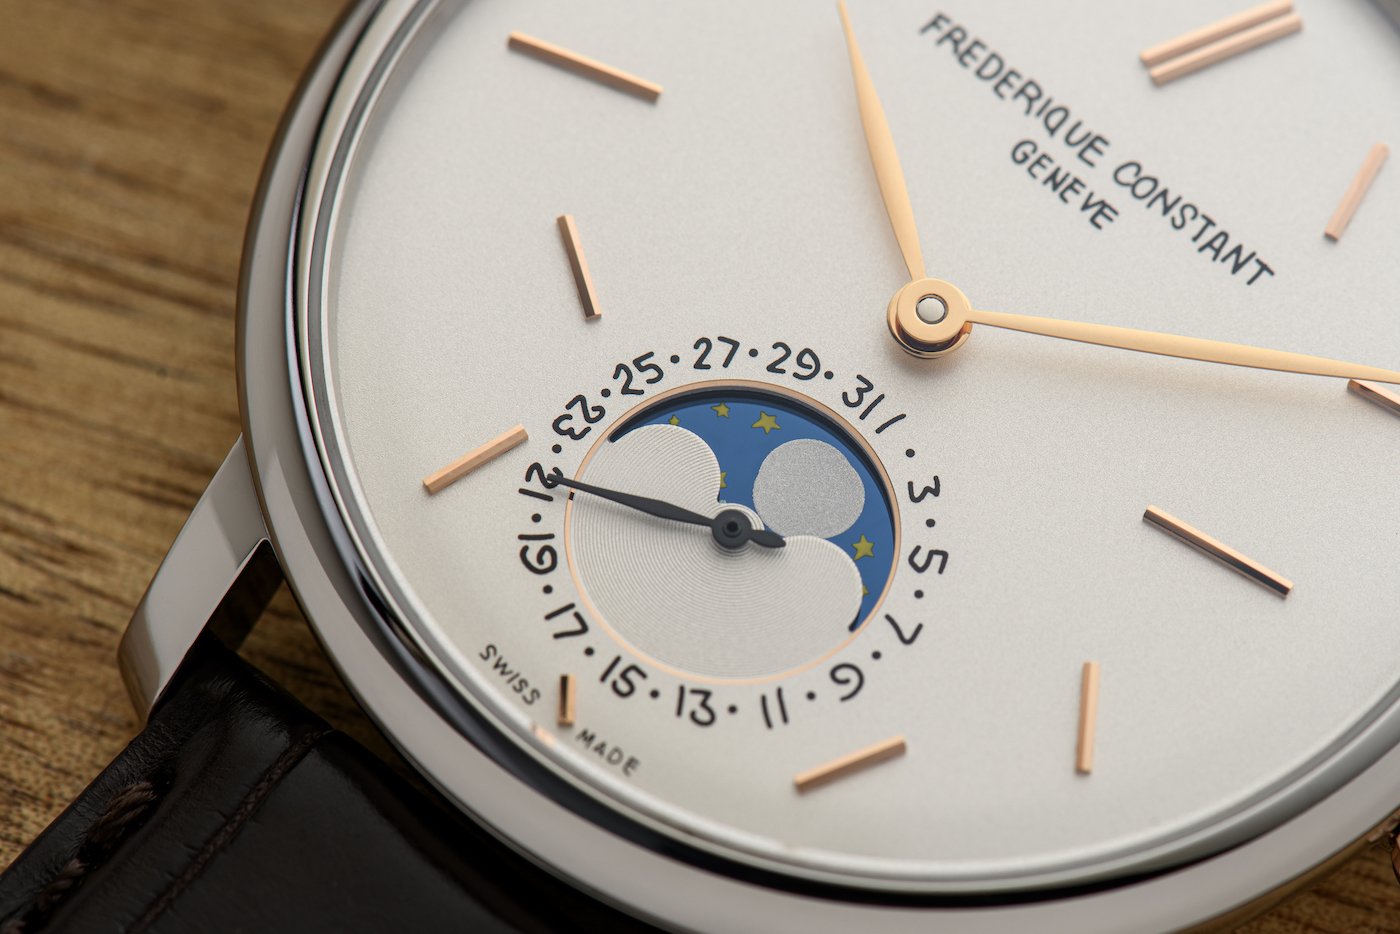 Frederique Constant and seconde/seconde/ team up